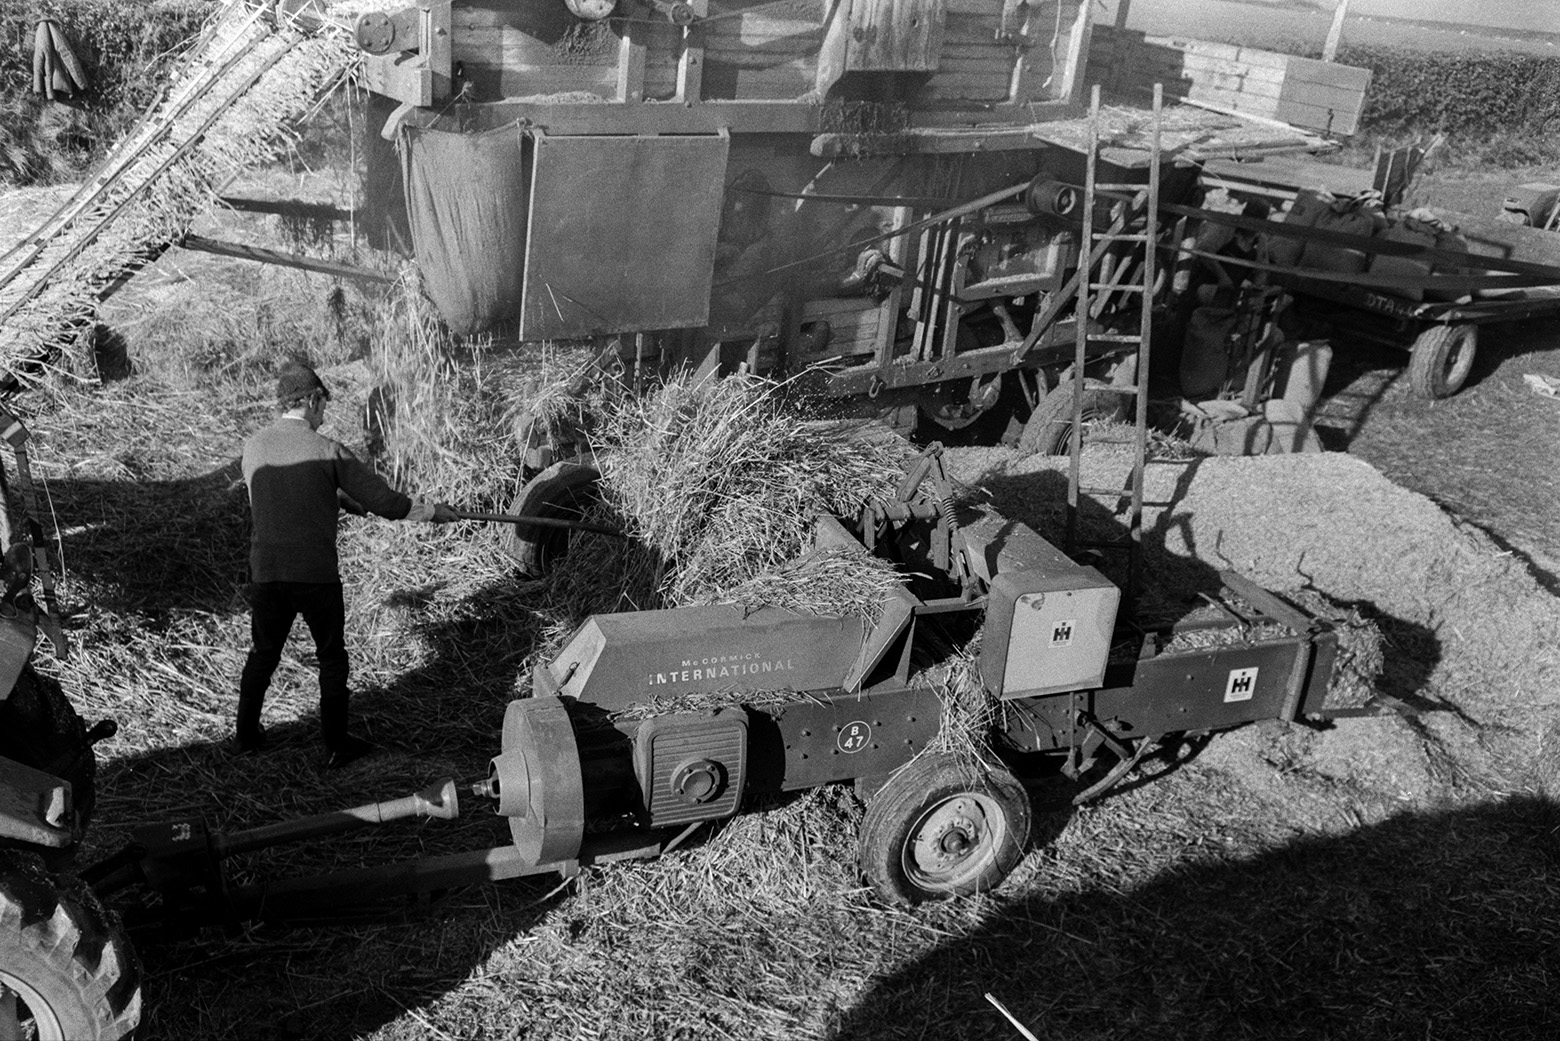 A baler next to a reed comber in a field at Beaford. Reed can be seen coming off the reed comber. A man is stacking some of the reed next to a baler in the foreground.